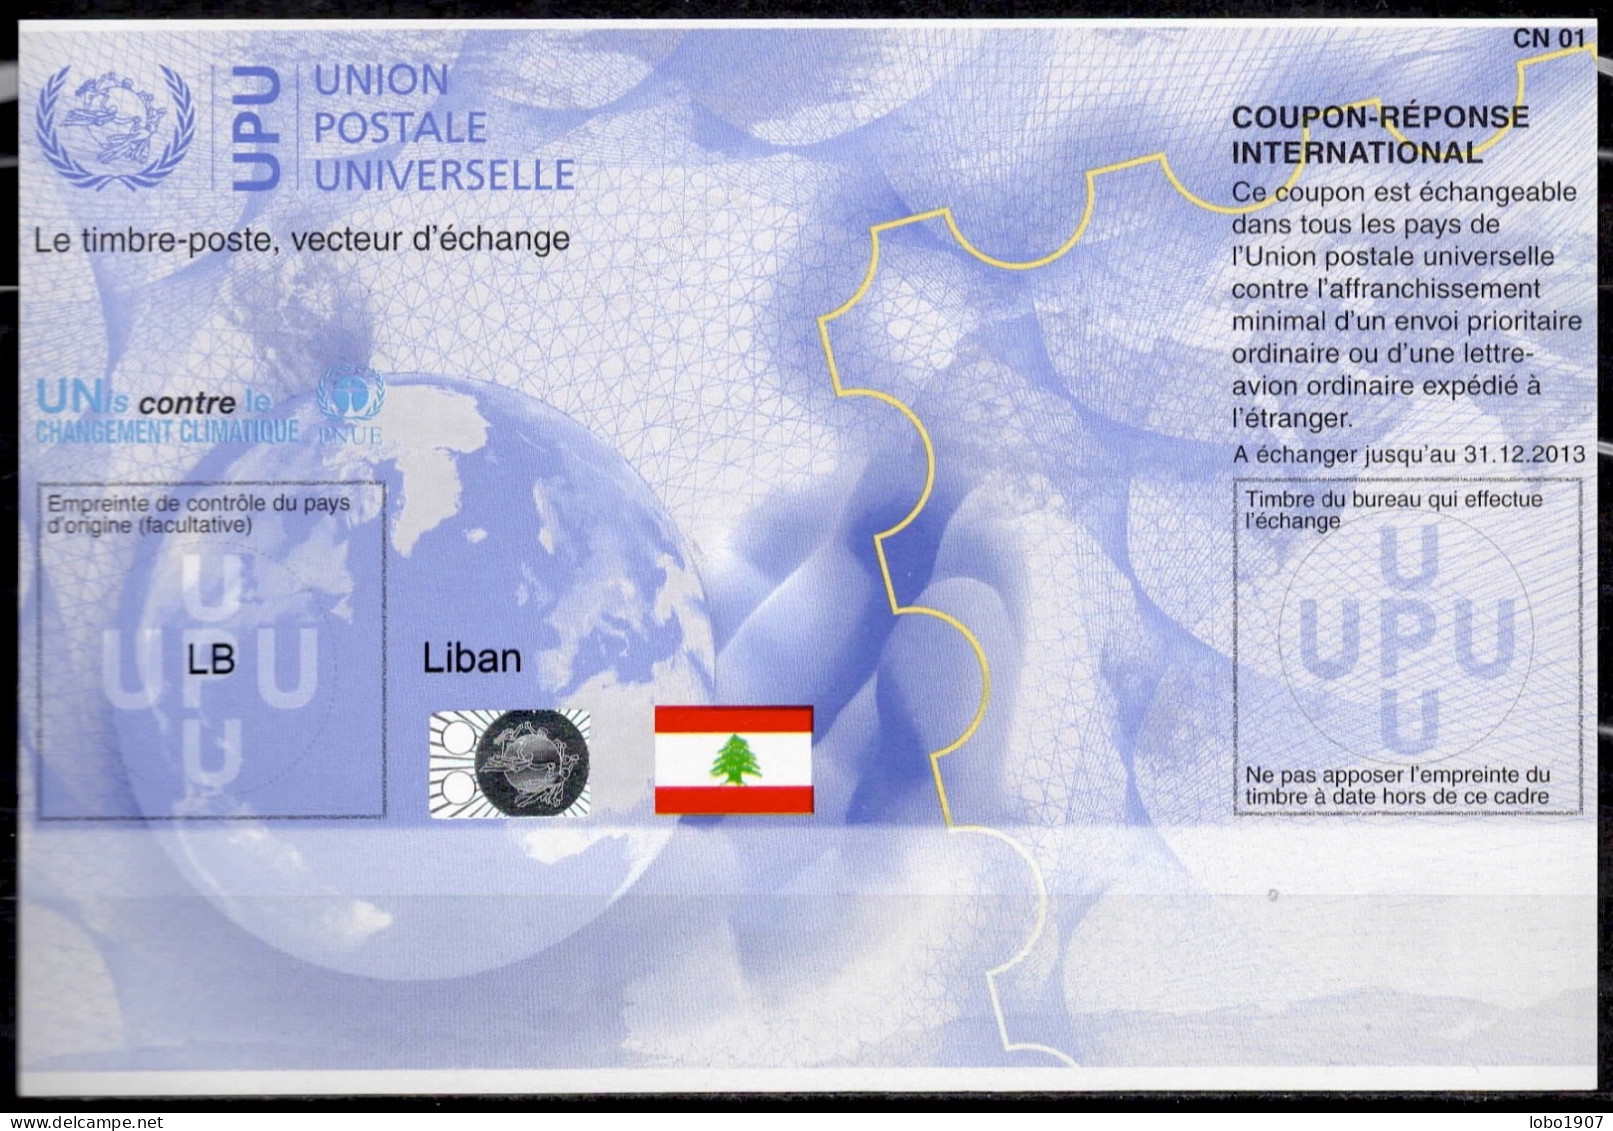 LIBAN LEBANON  Collection 9 International and Arab Union Reply Coupon Reponse Cupon Respuesta IRC IAS see list and scans